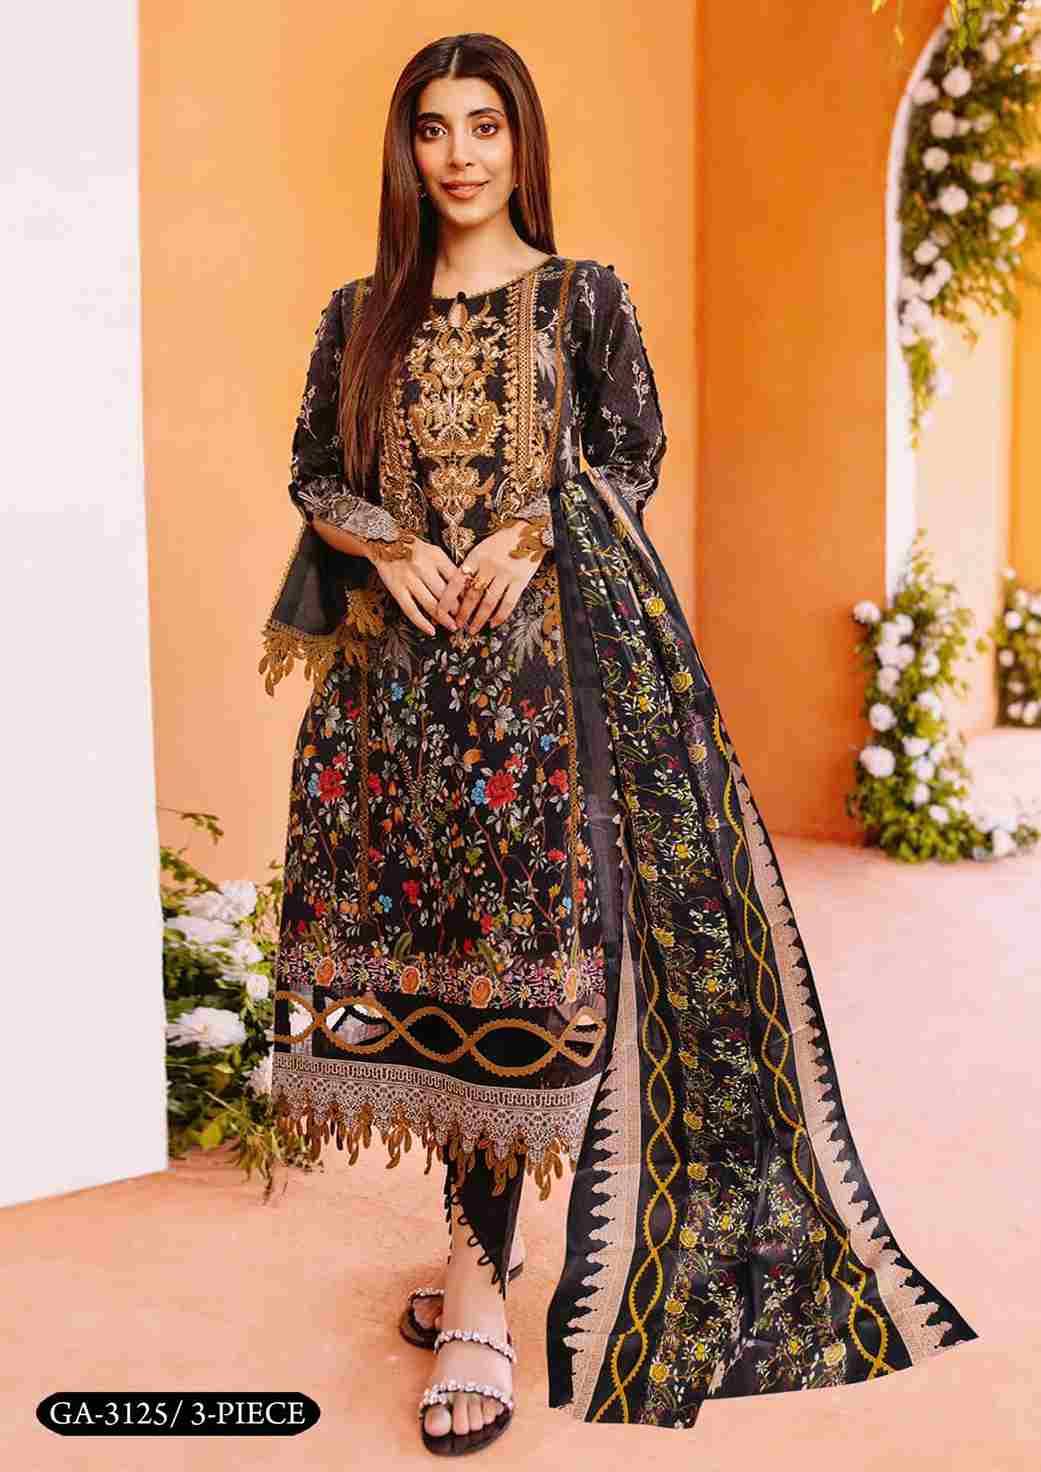 Noorain Vol-2 By Gull Aahmed 3120 To 3125 Series Beautiful Festive Suits Colorful Stylish Fancy Casual Wear & Ethnic Wear Heavy Cotton Print Dresses At Wholesale Price